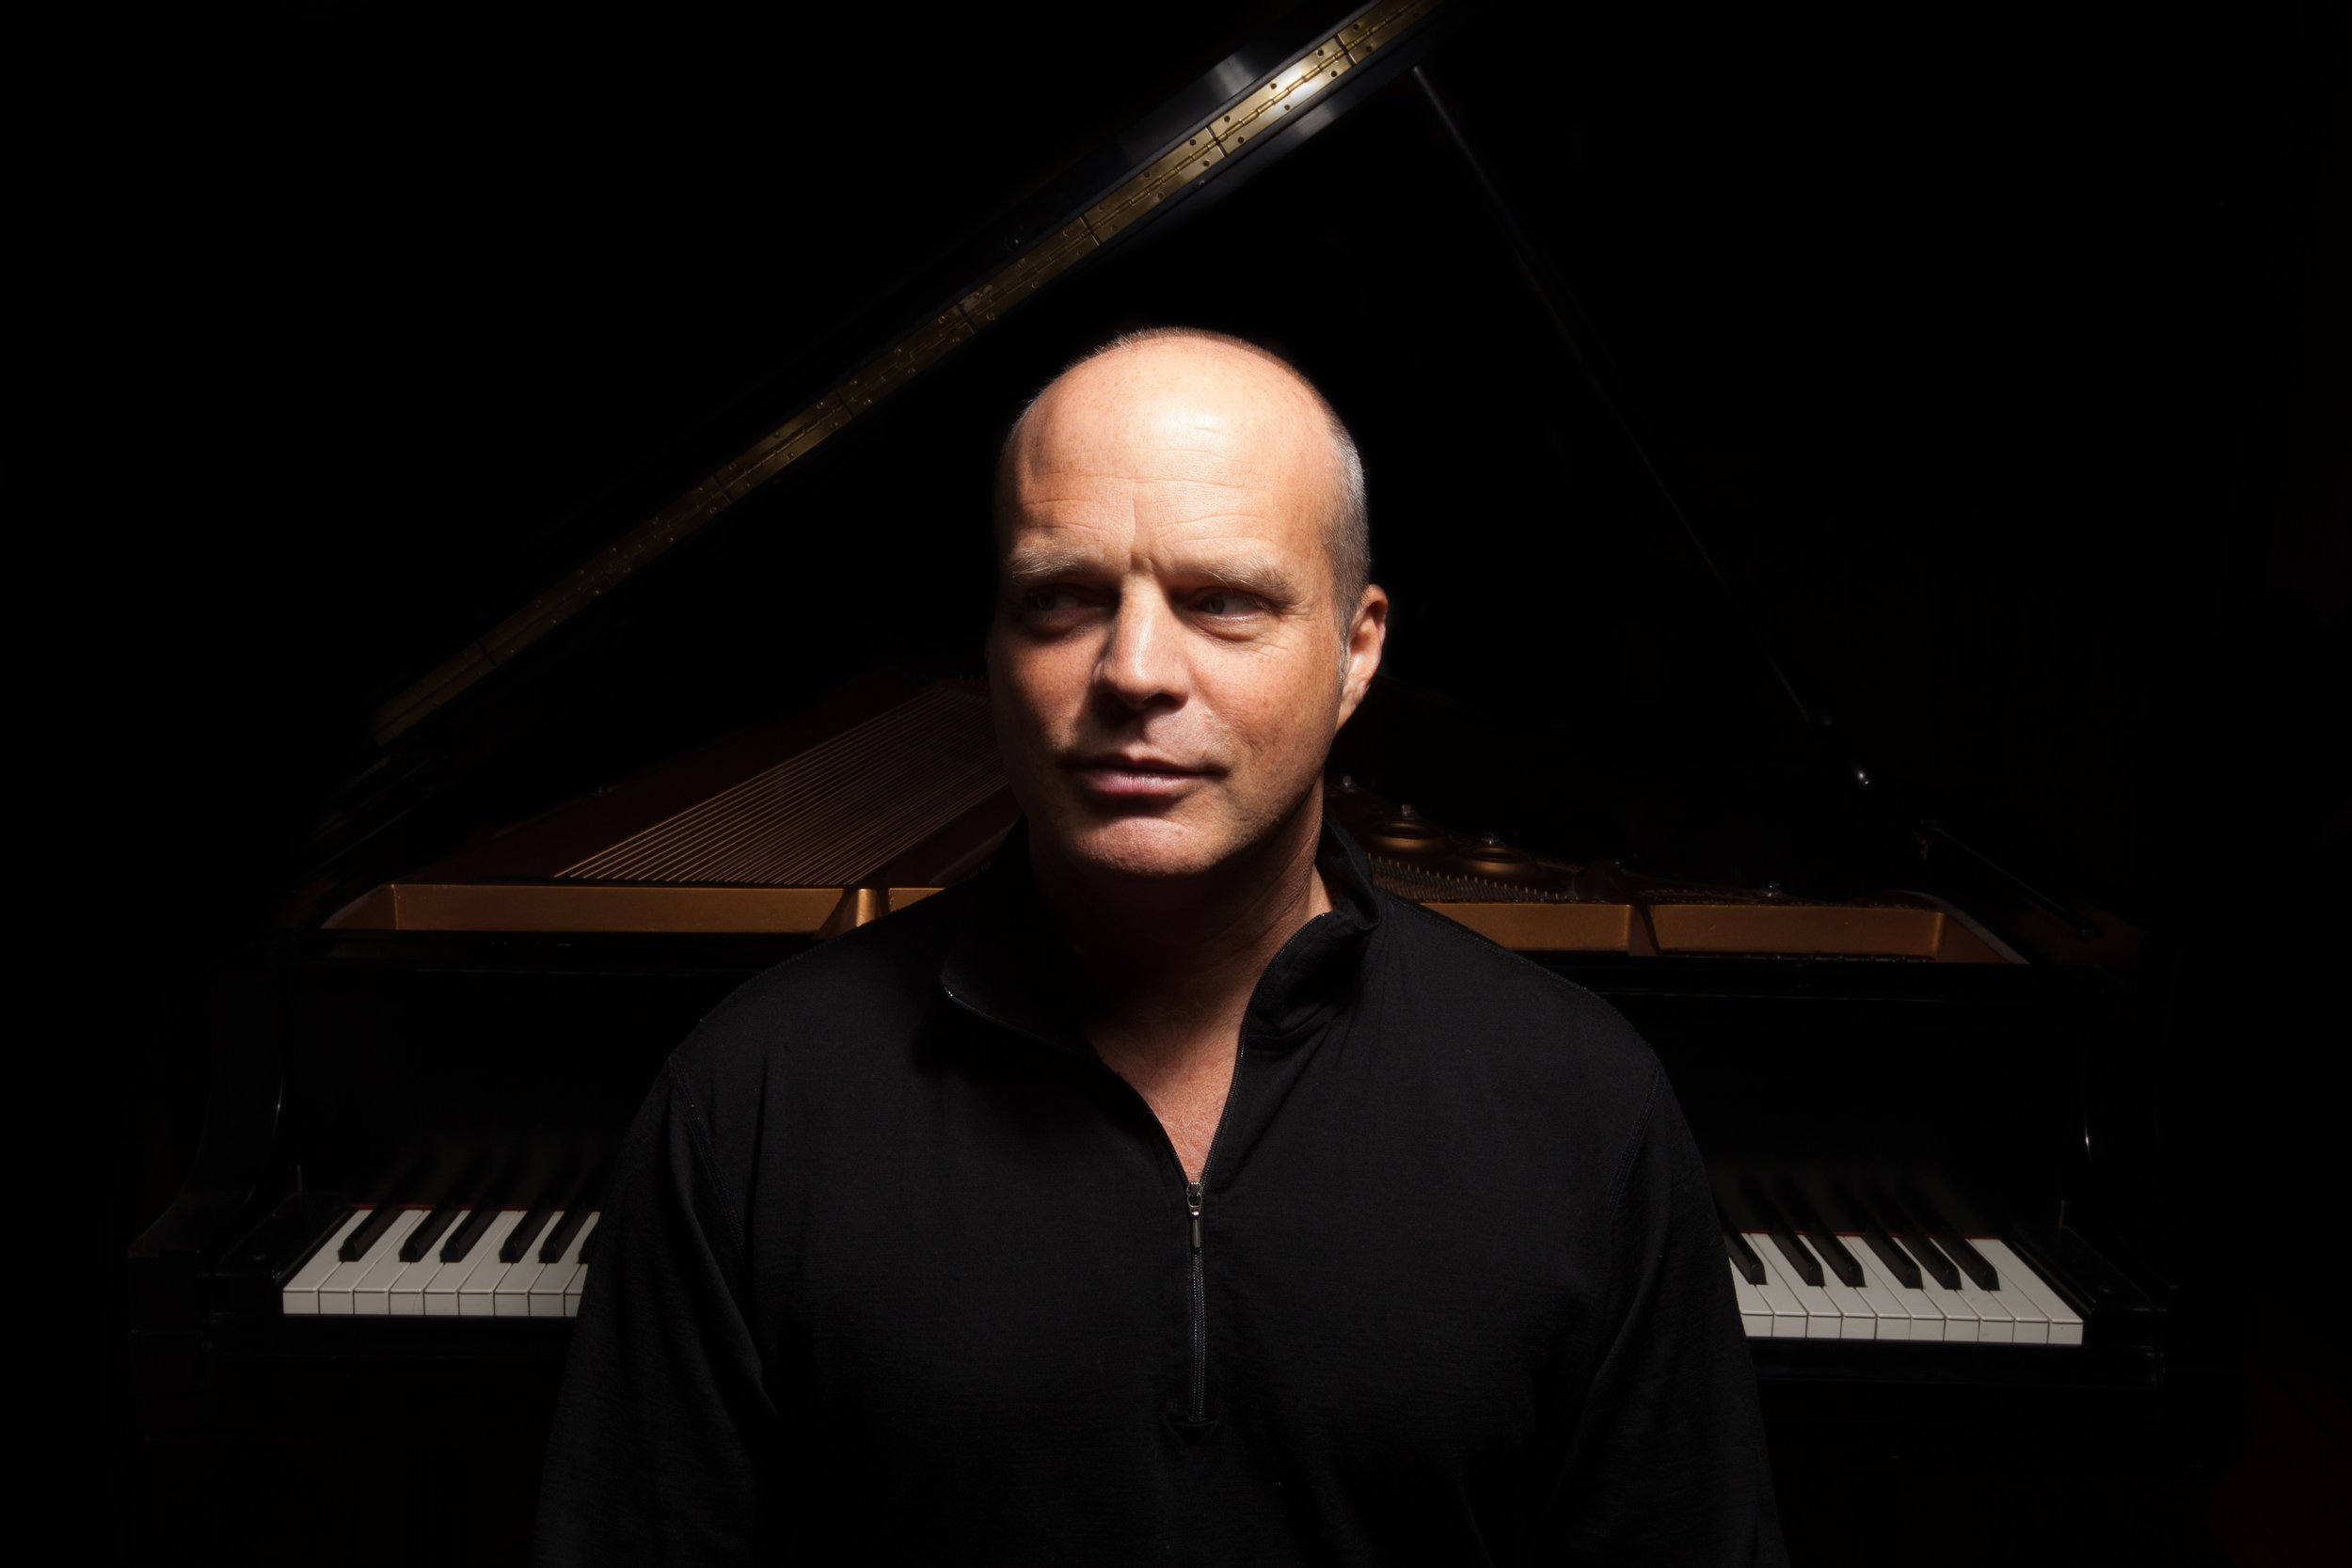 Photo of John Medeski in front of his piano (almost like a silhouette)